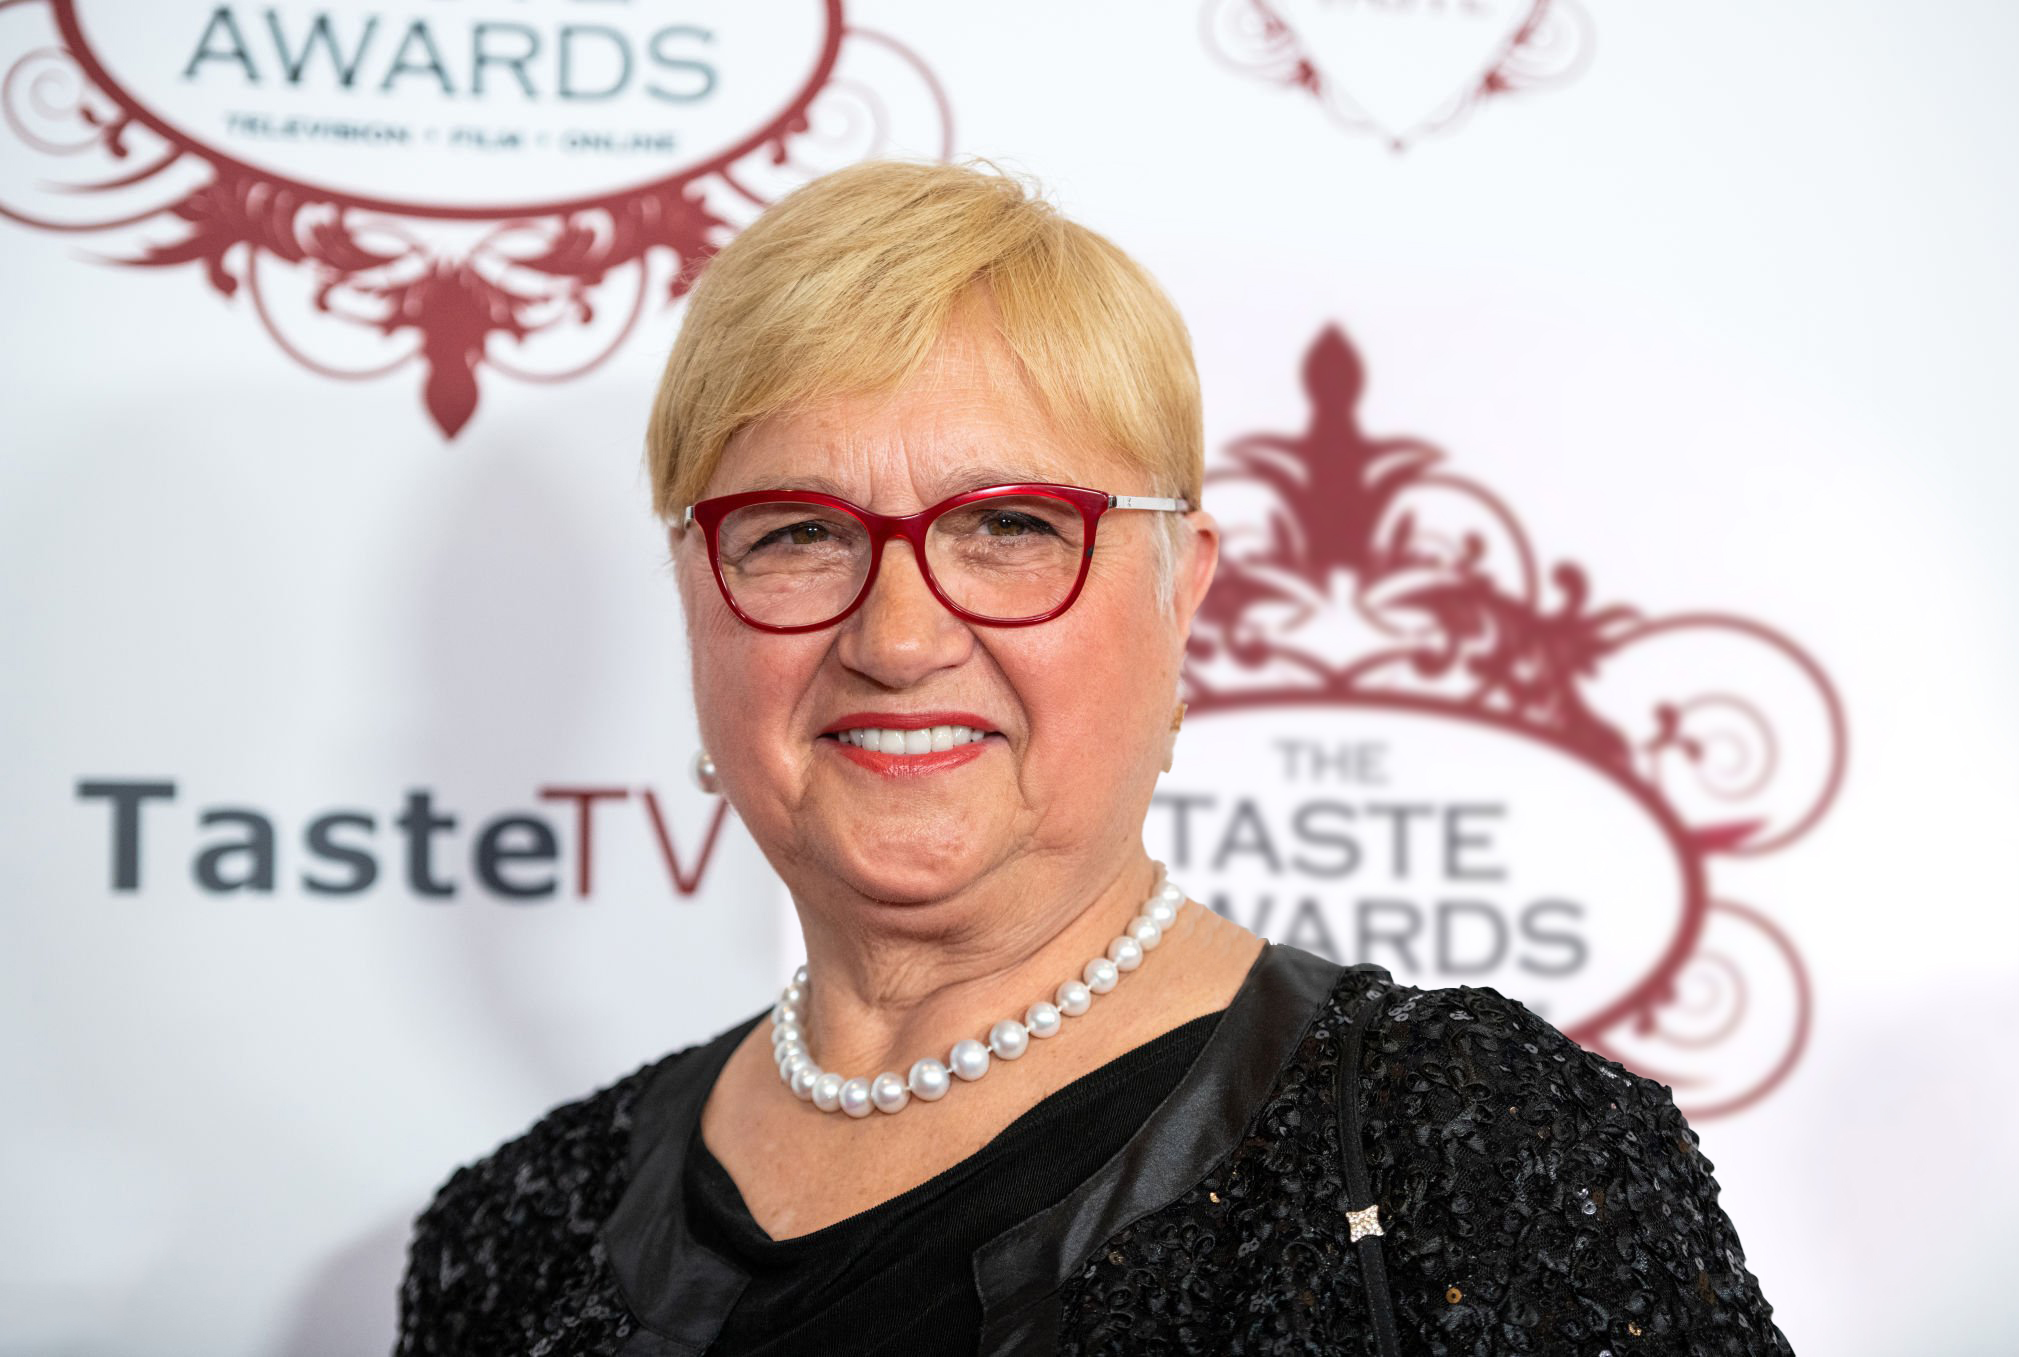 Chef Lidia Bastianich at the 2023 Taste Awards